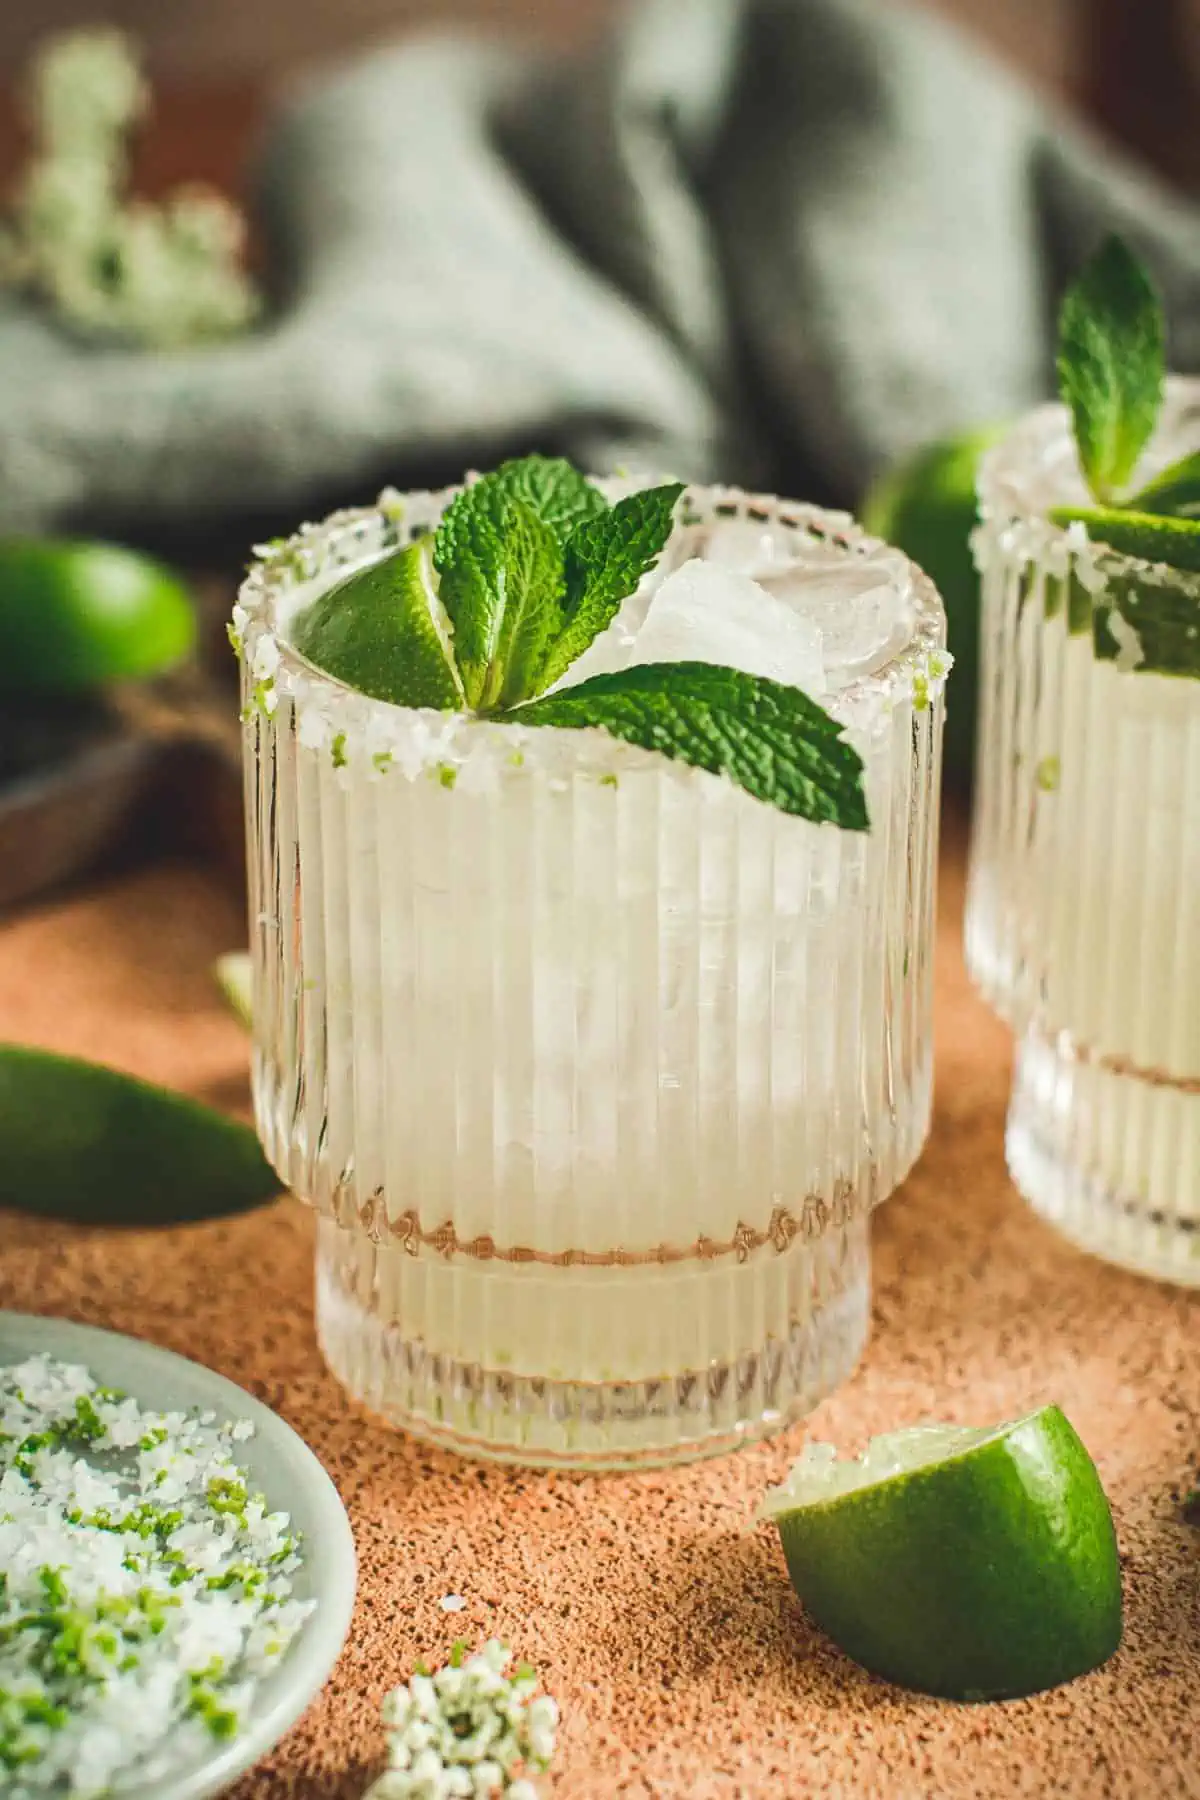 Margarita on the rock with a mint leaf and lime wedge.